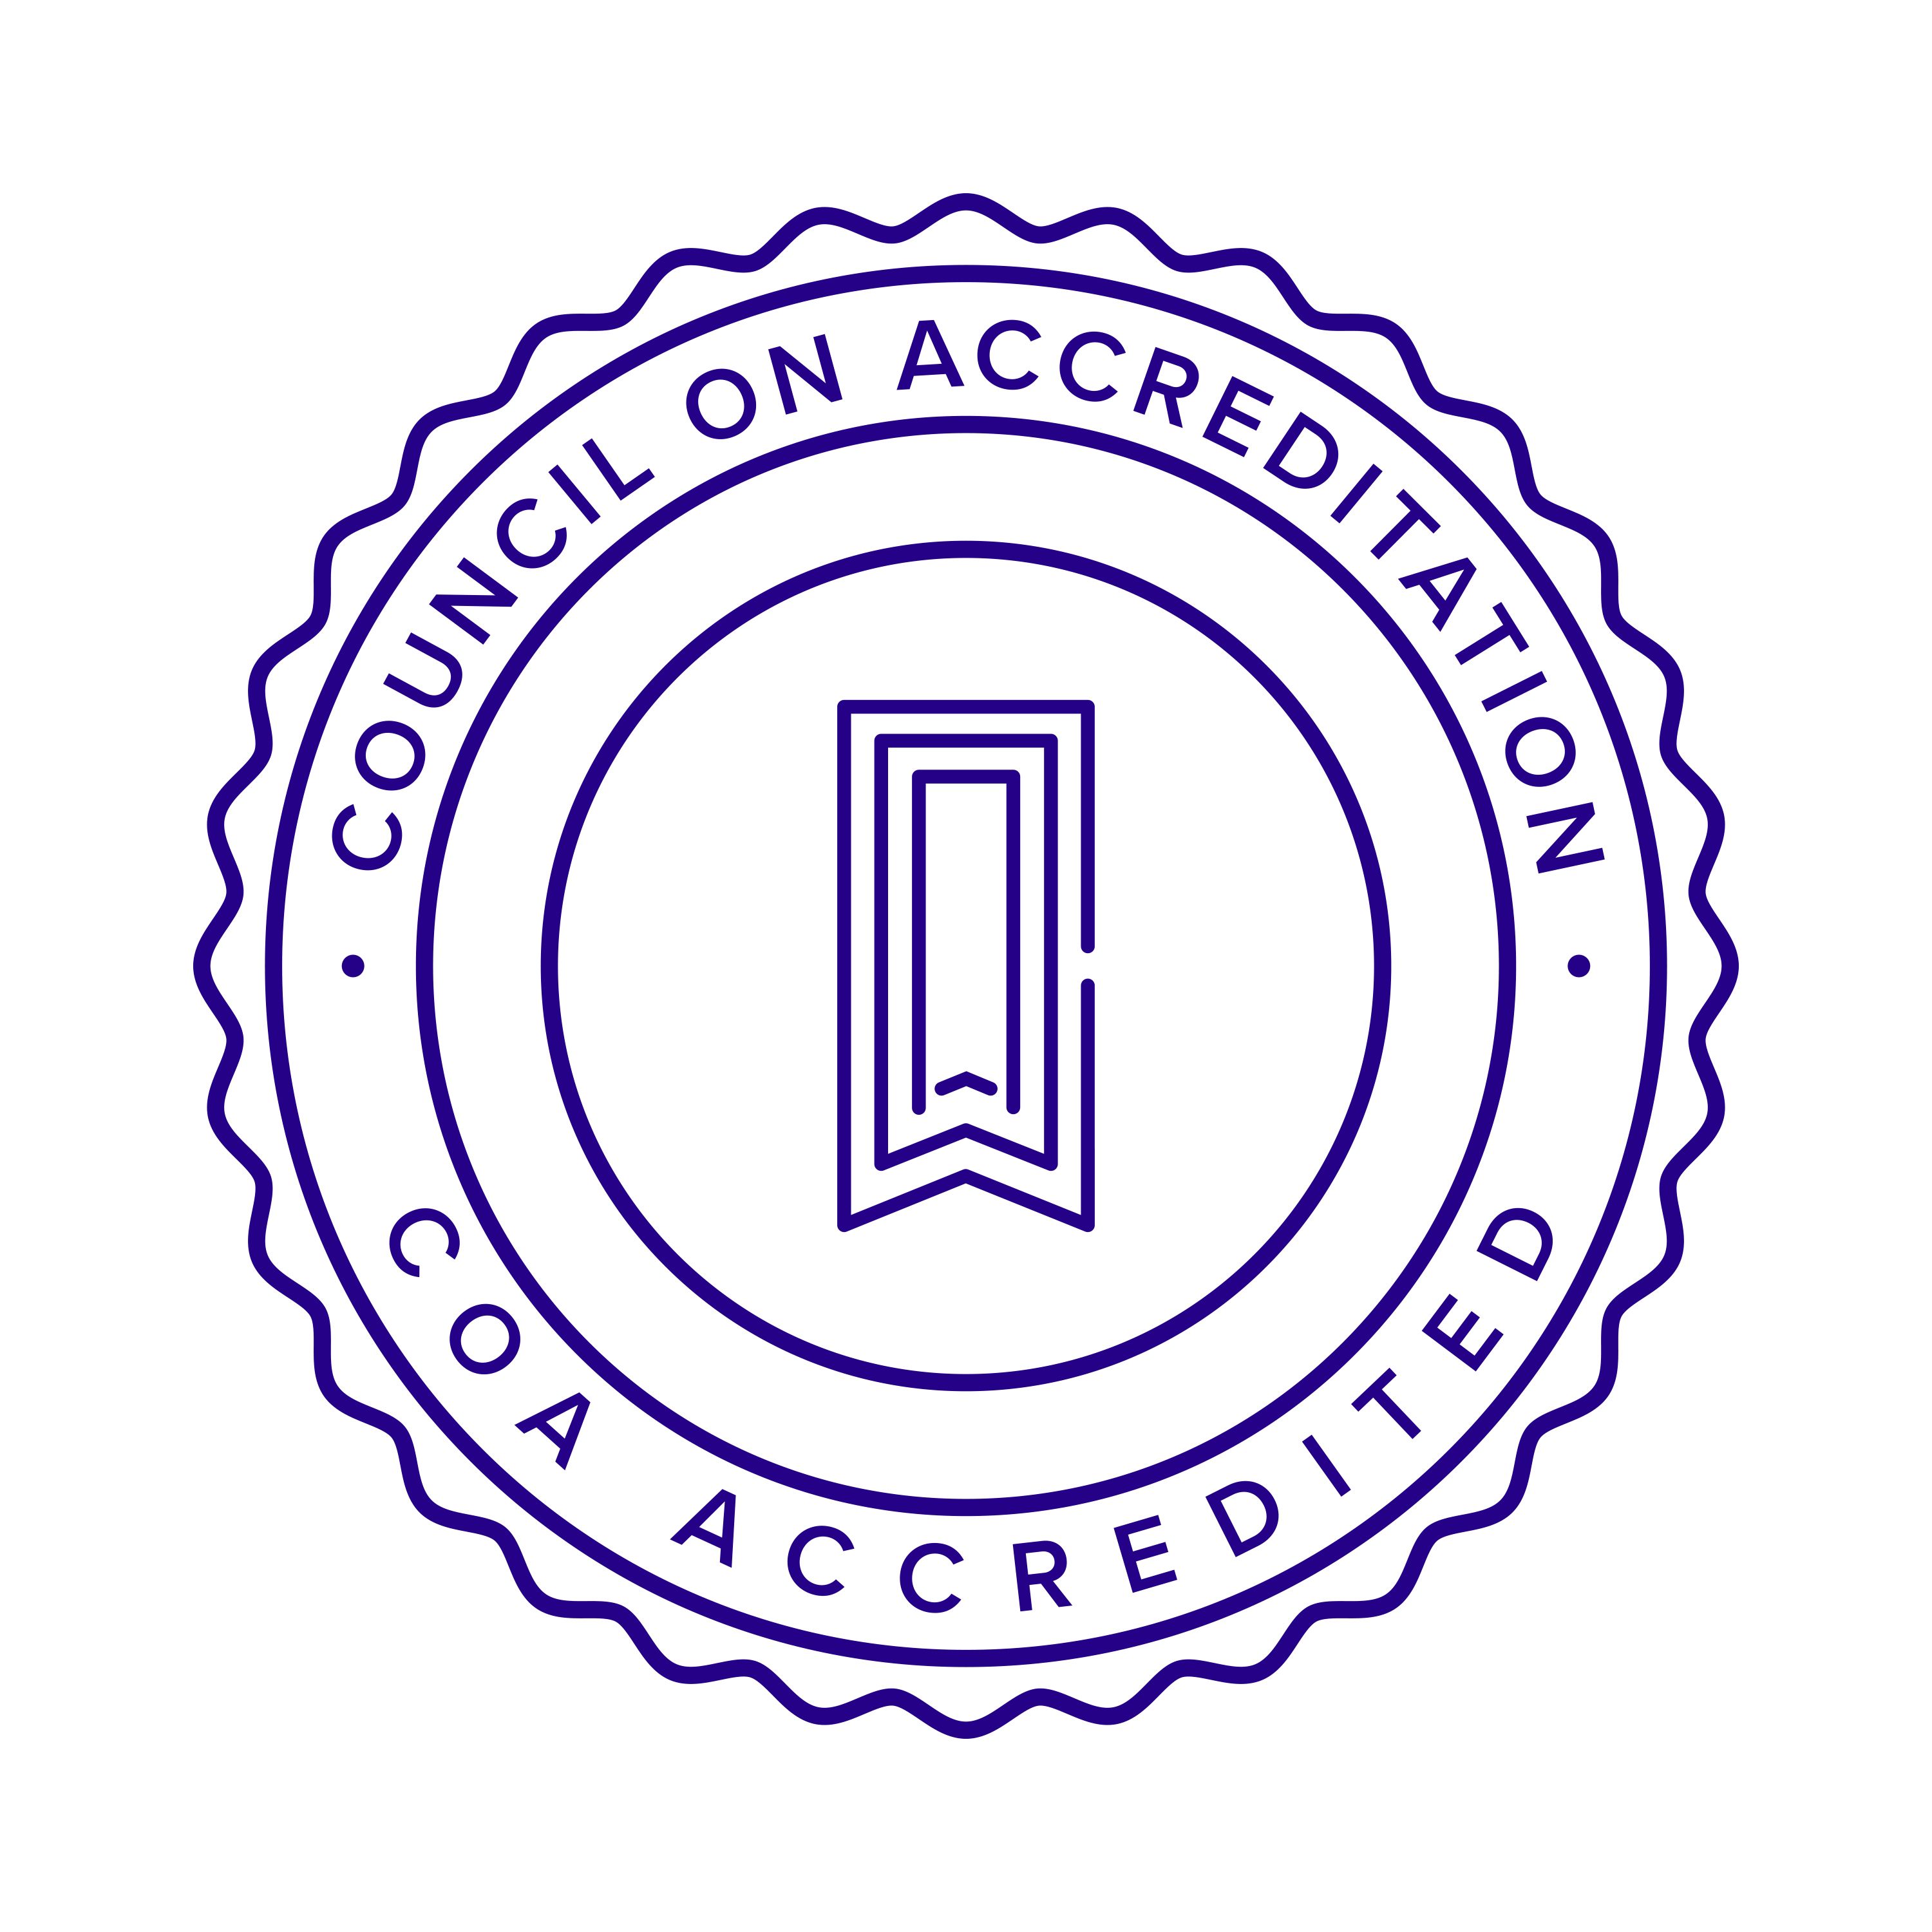 Accredited by the Council on Accreditation